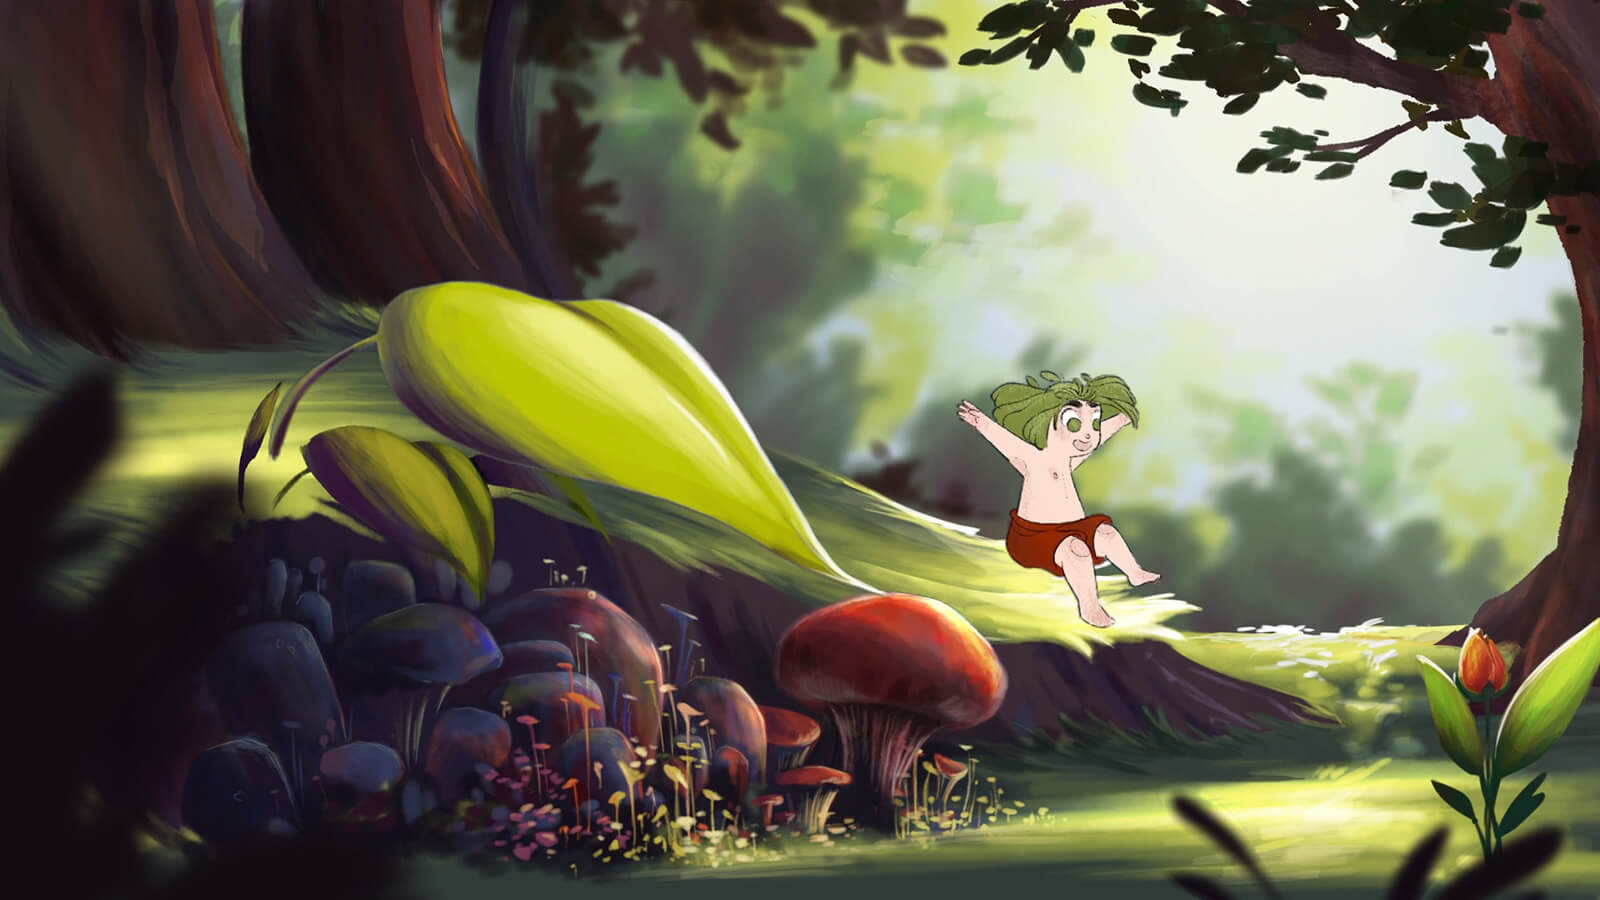 A young child slides down a giant leaf and is about to land near a group of mushrooms within a forest